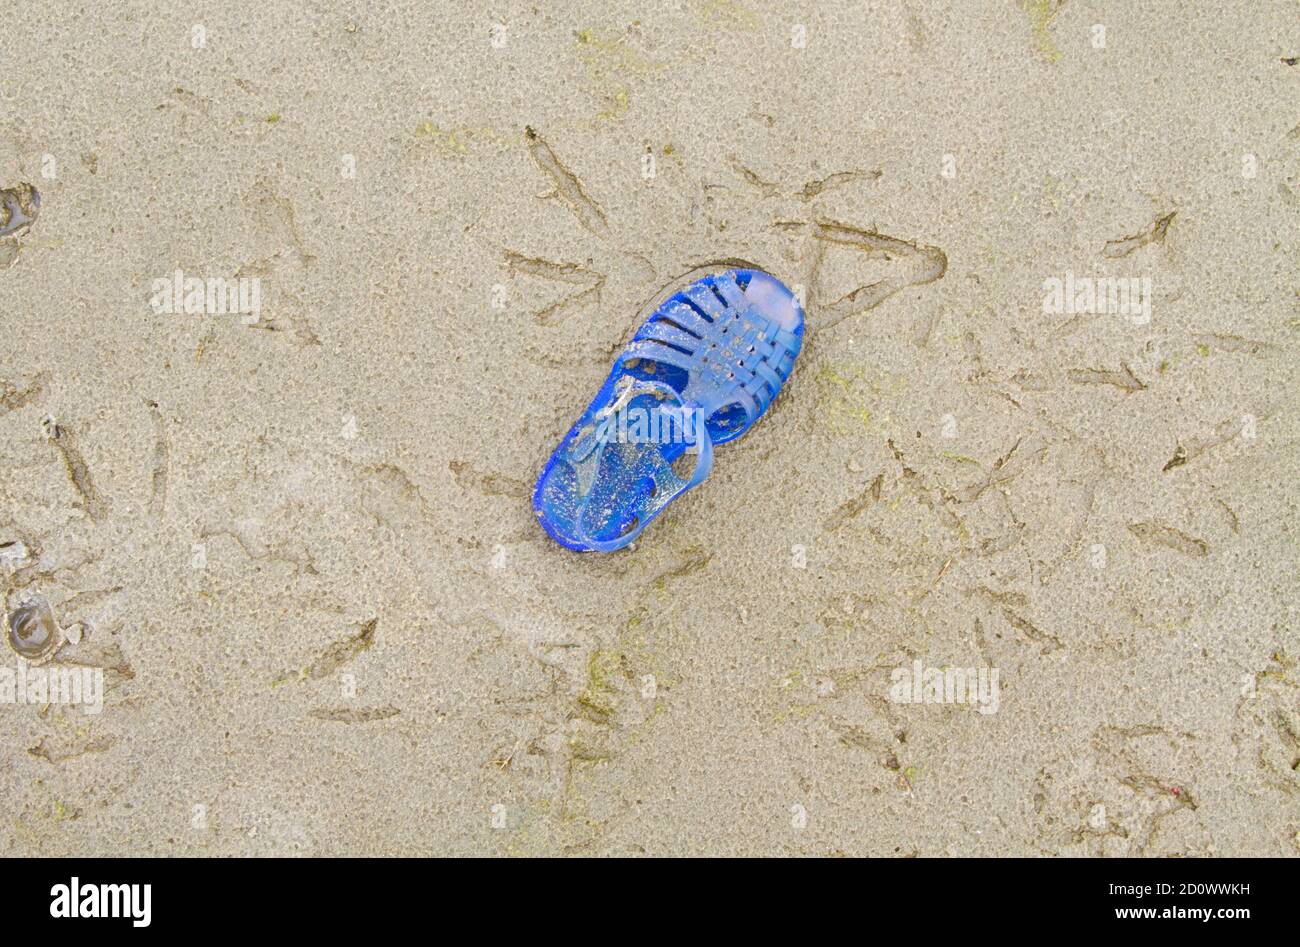 Blue plastic children’s sandal washed up the beach Stock Photo